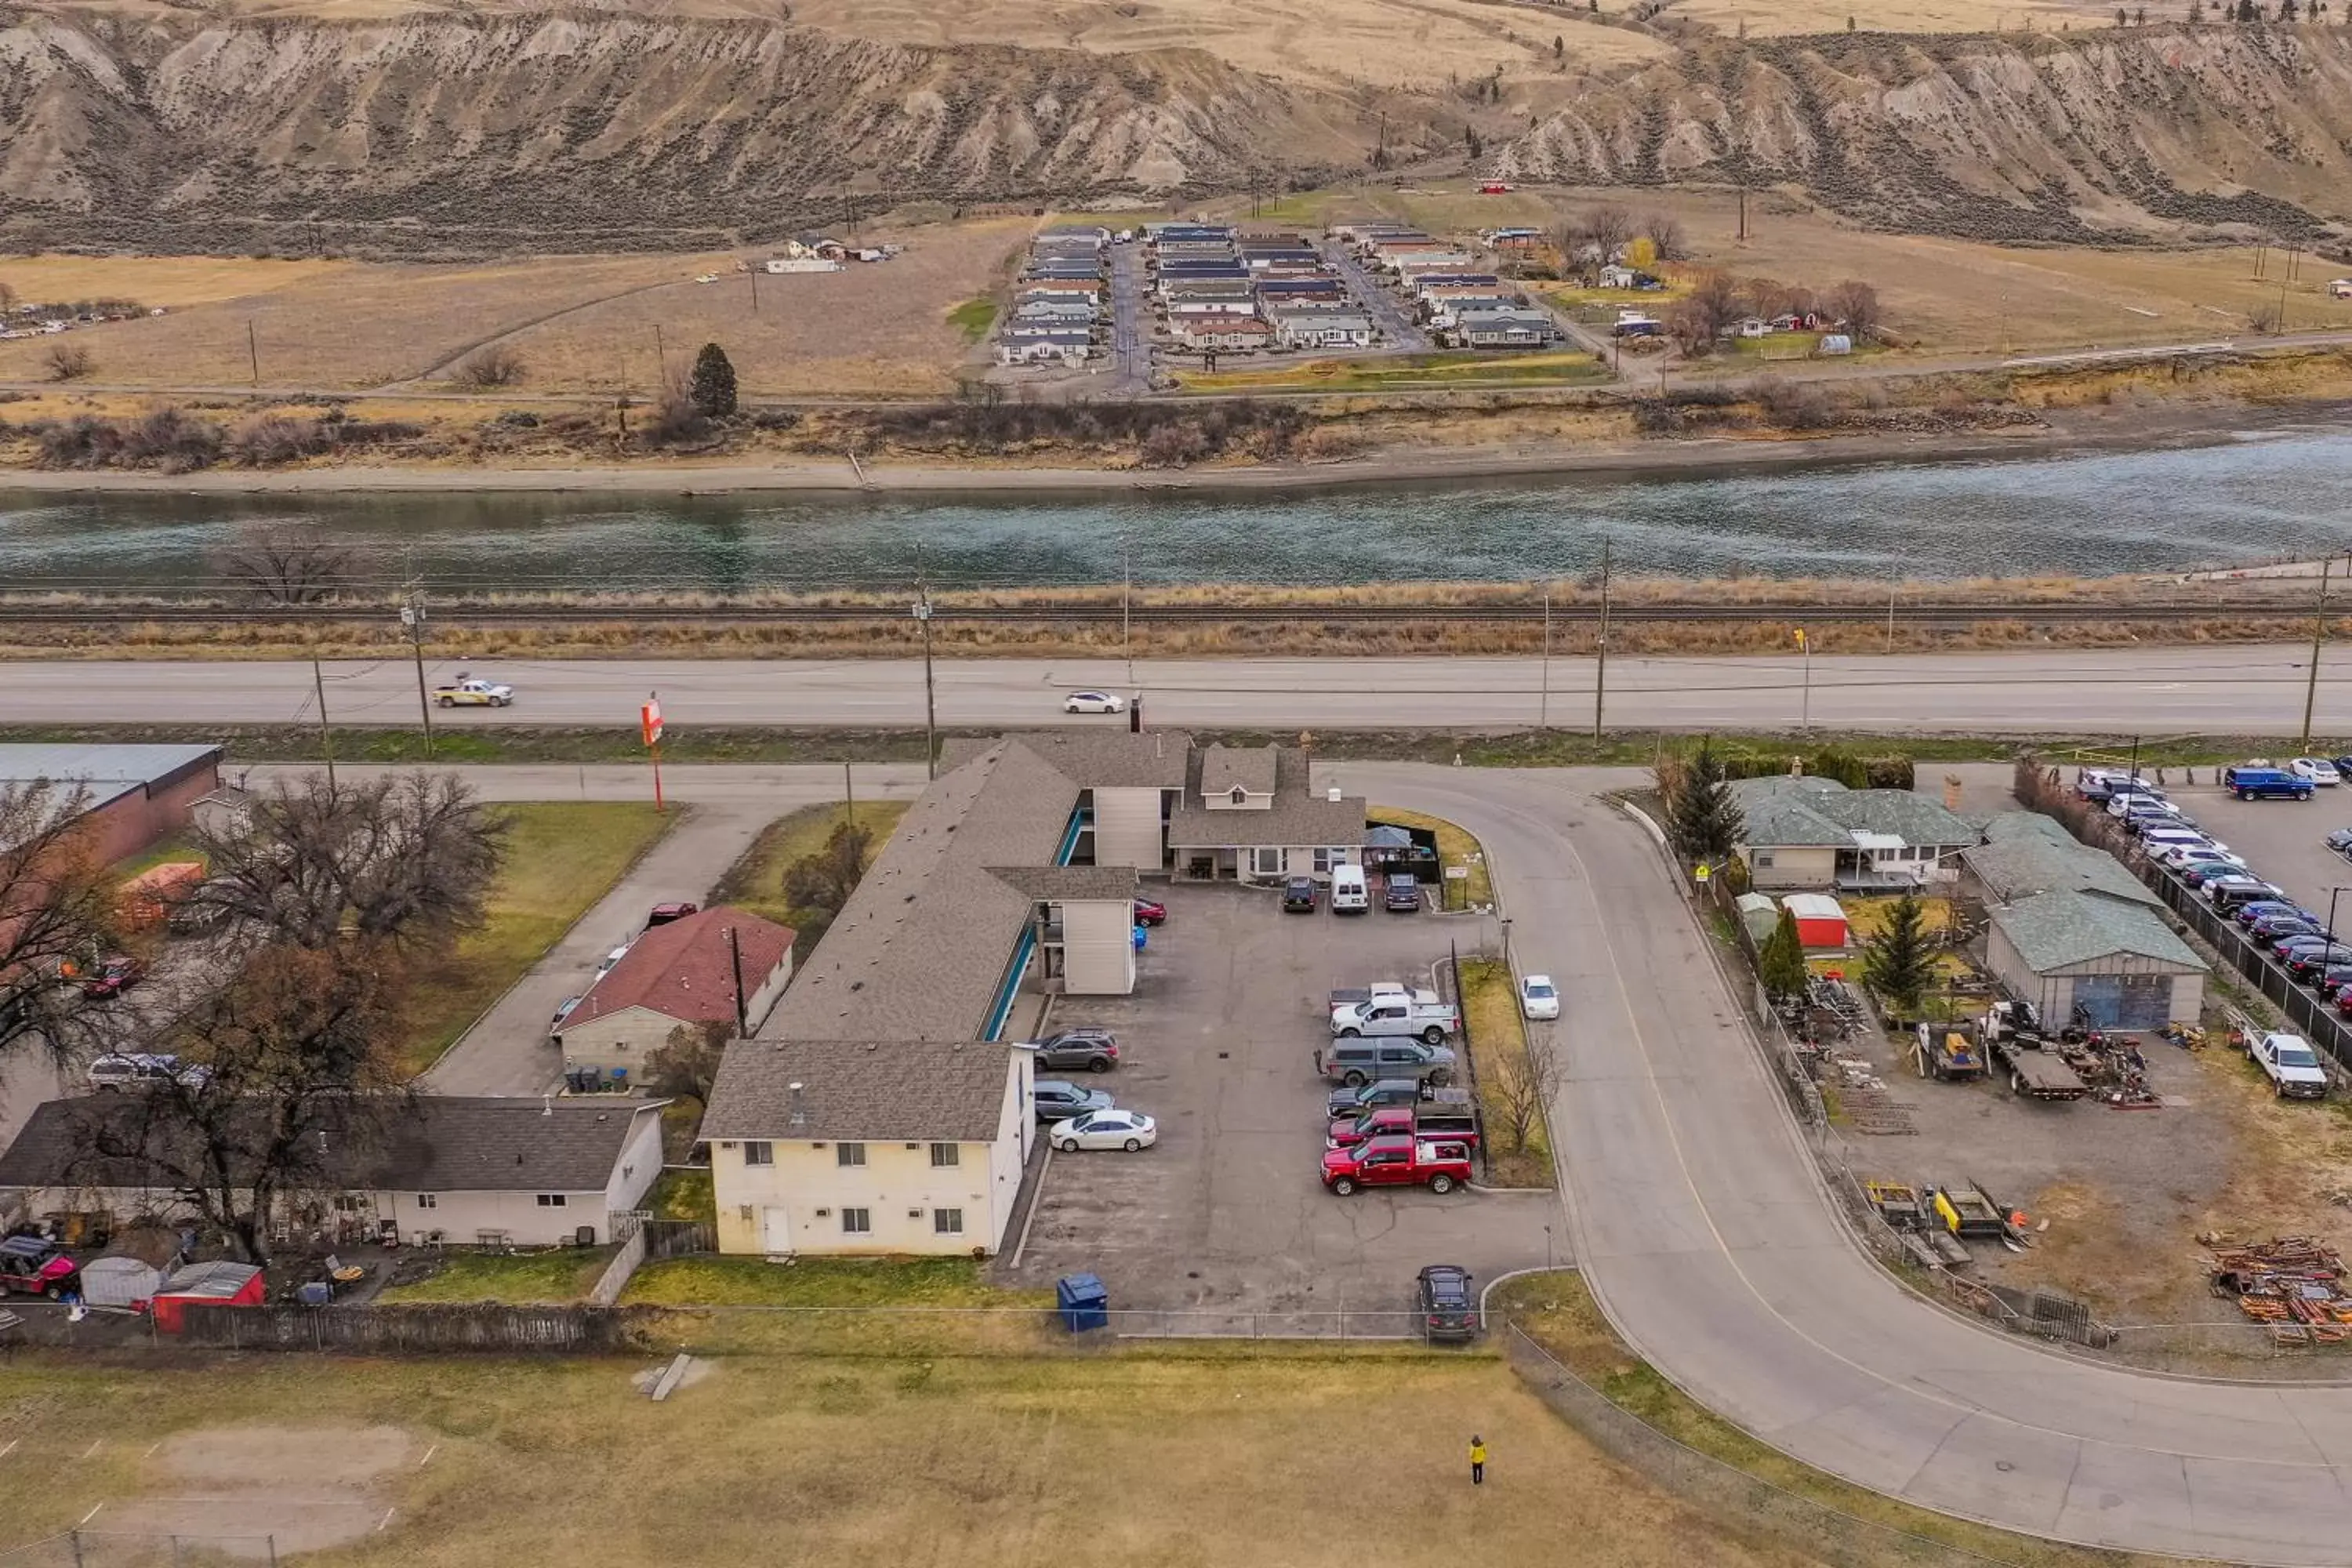 Property building, Bird's-eye View in The Ranchland Inn Kamloops